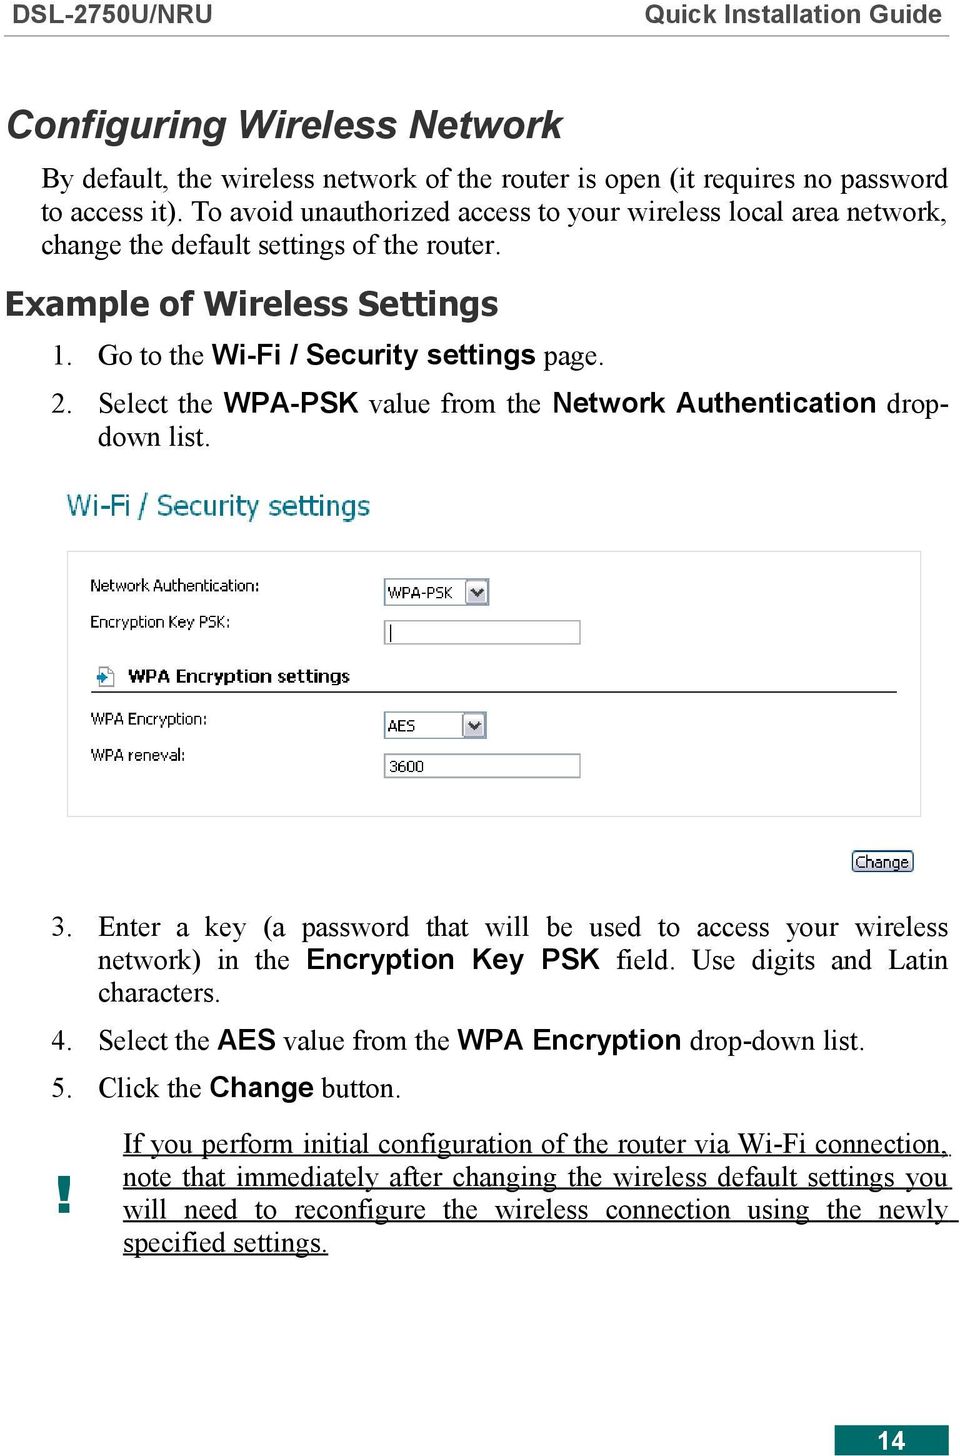 Select the WPA-PSK value from the Network Authentication dropdown list. 3. Enter a key (a password that will be used to access your wireless network) in the Encryption Key PSK field.